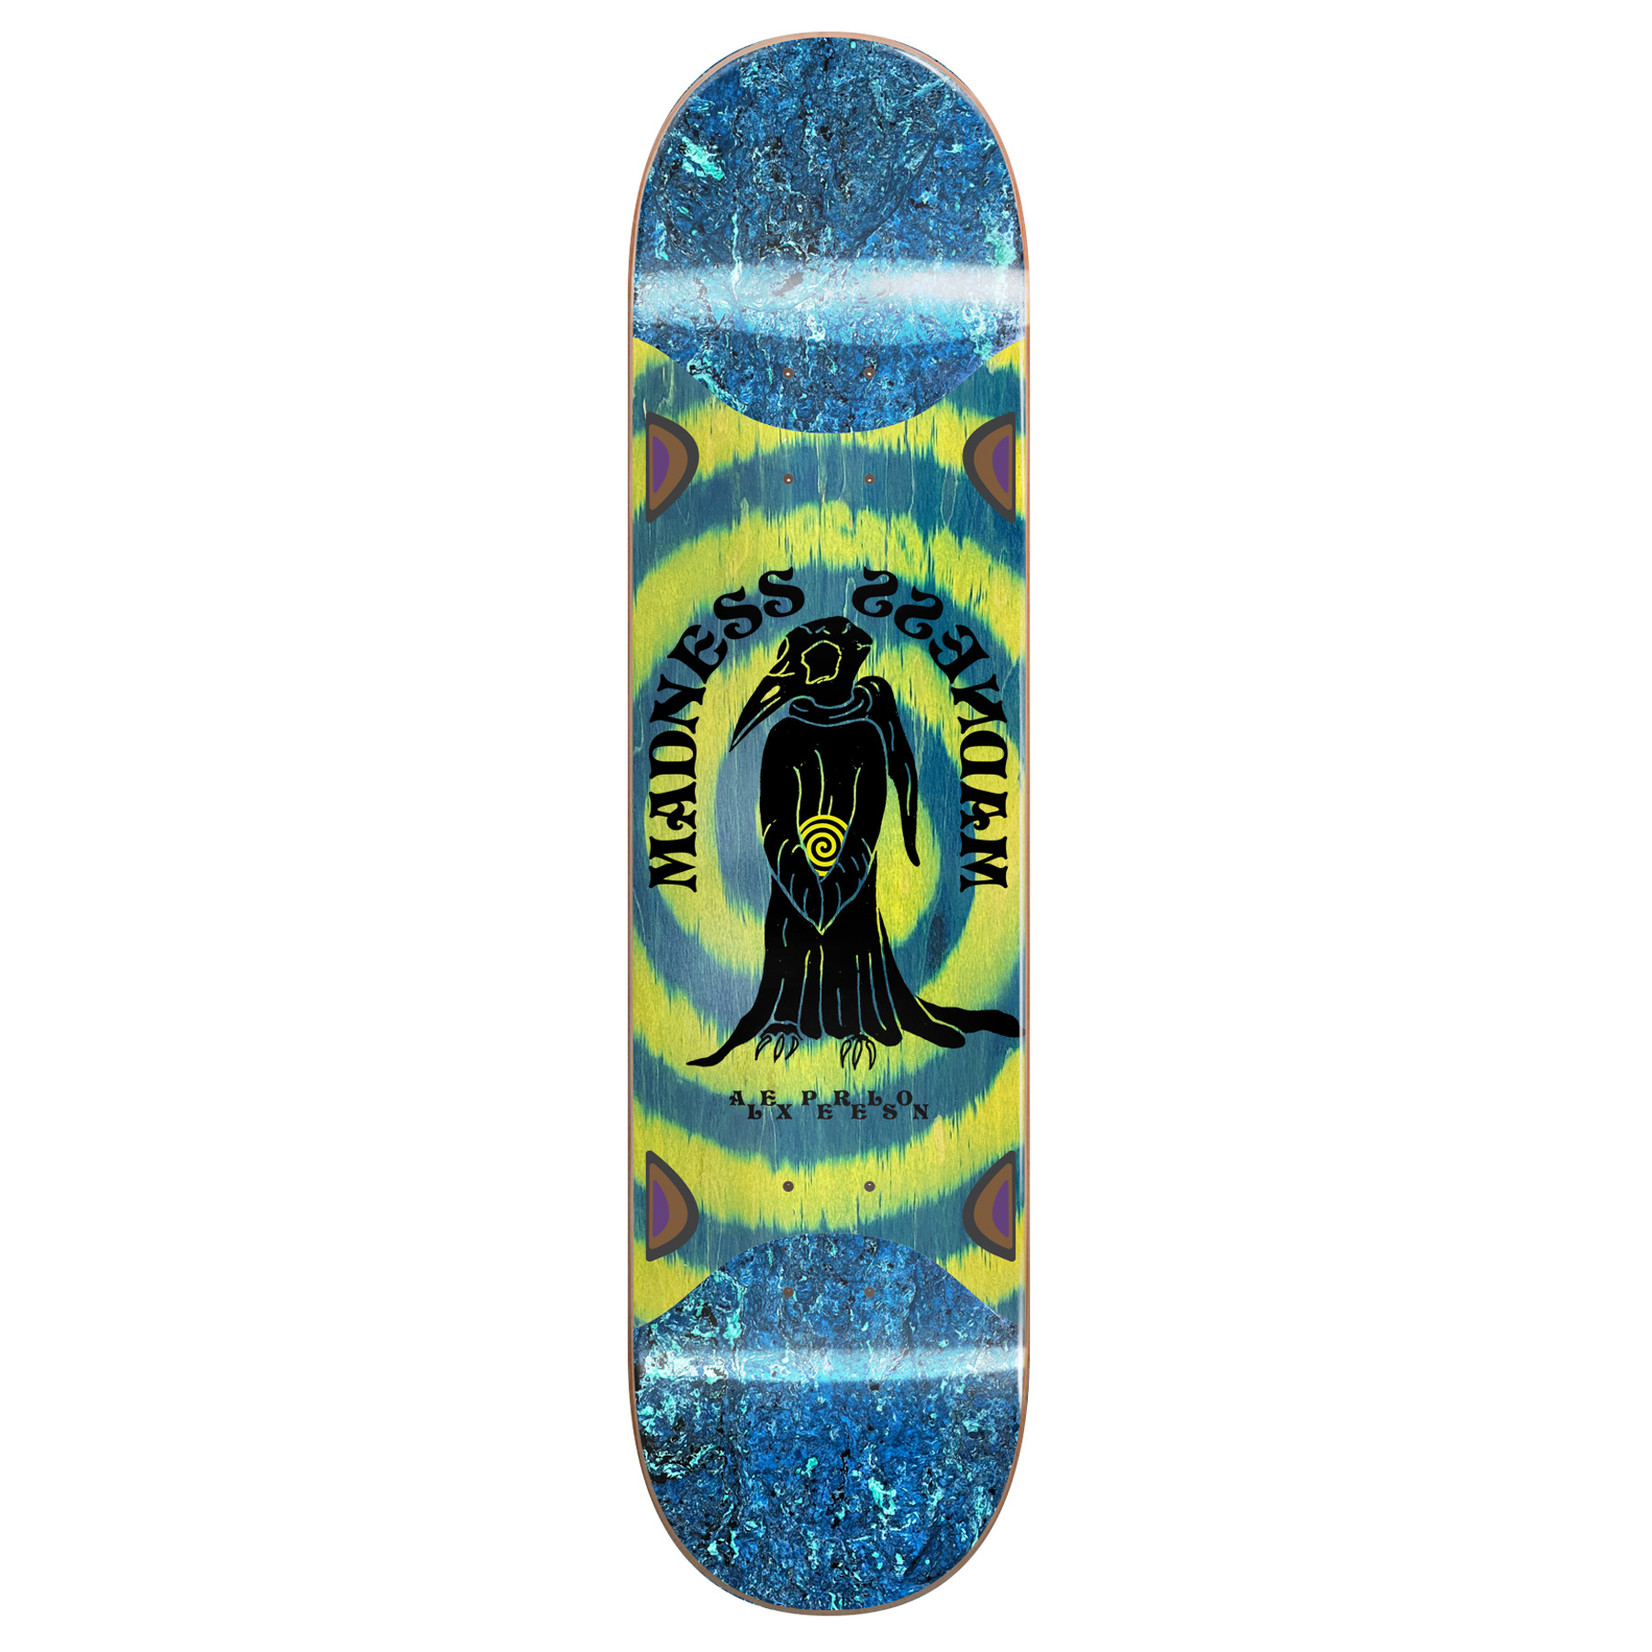 Madness MADNESS Perelson Birdie R7 Slick Popsicle Deck - 8.375 x 32.4 x 14.75